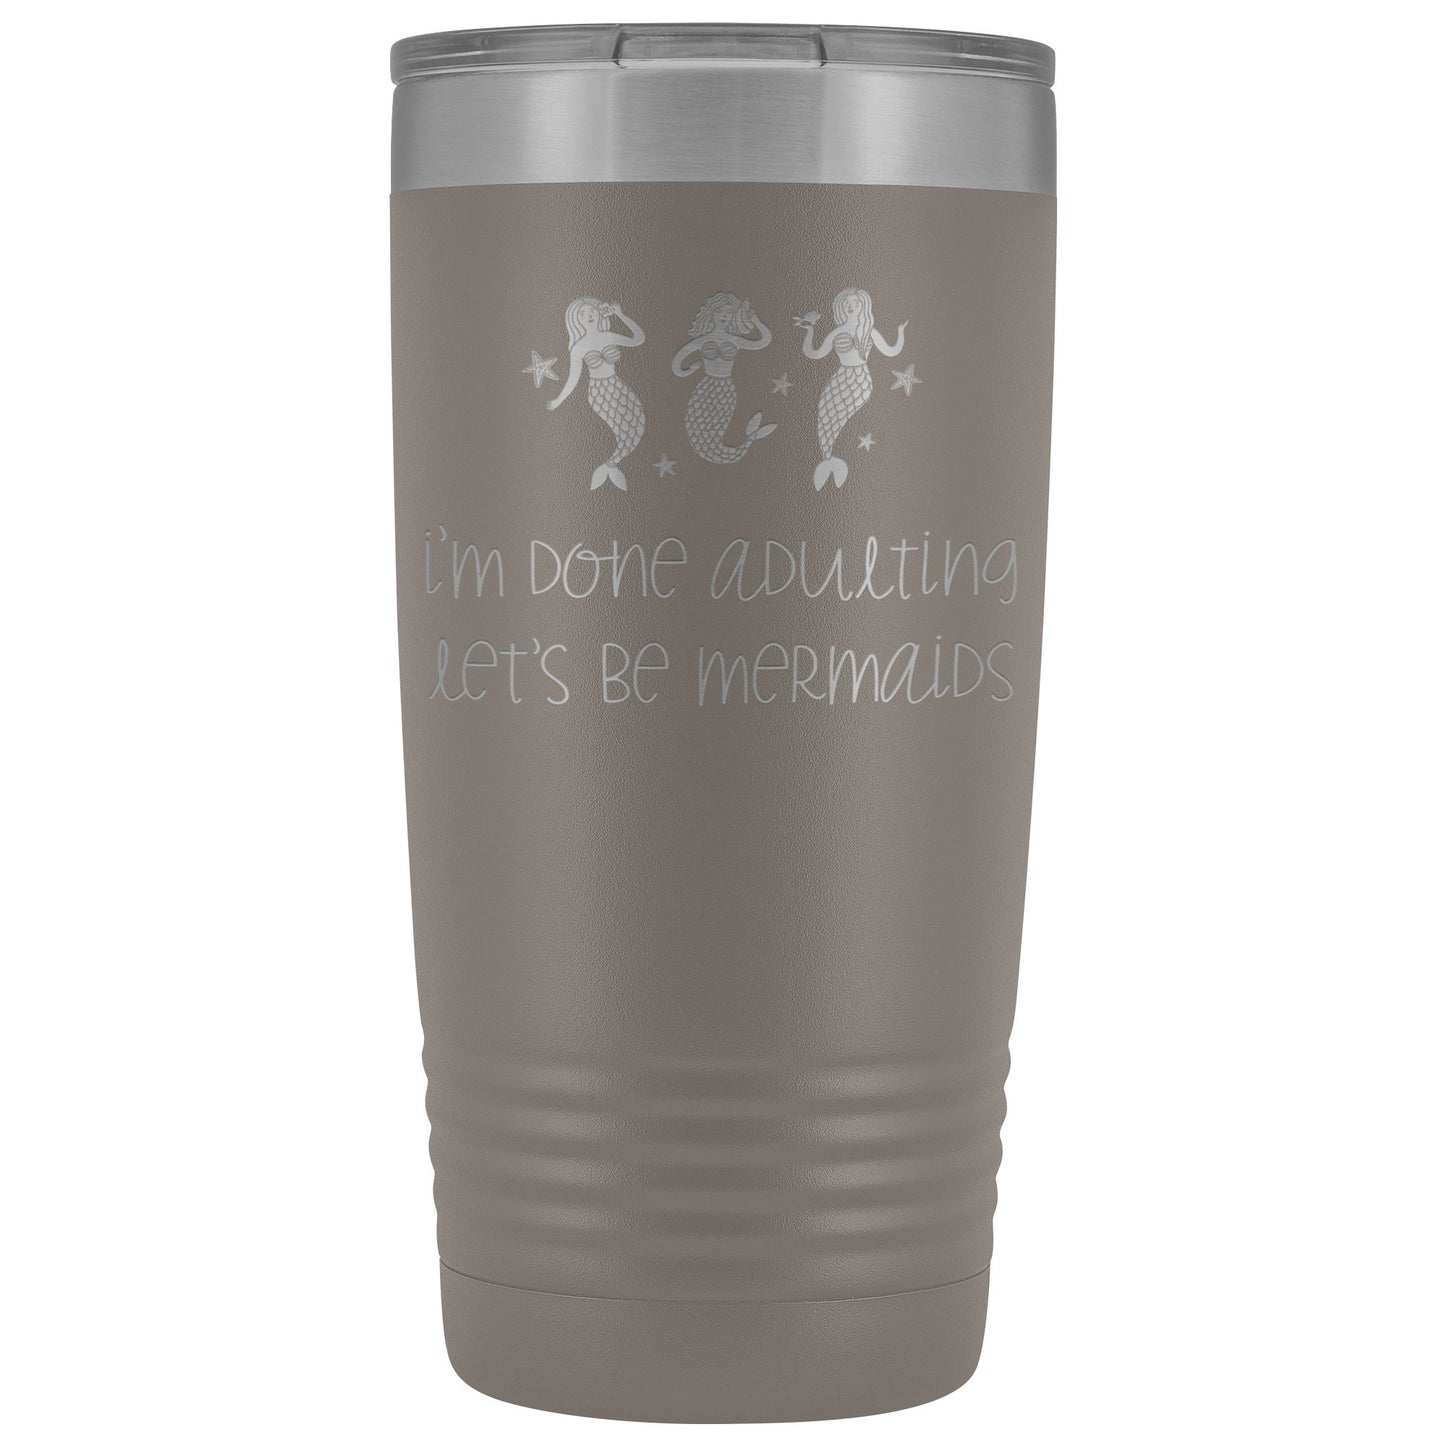 Done Adulting, Let's Be Mermaids 20oz. Insulated Tumbler